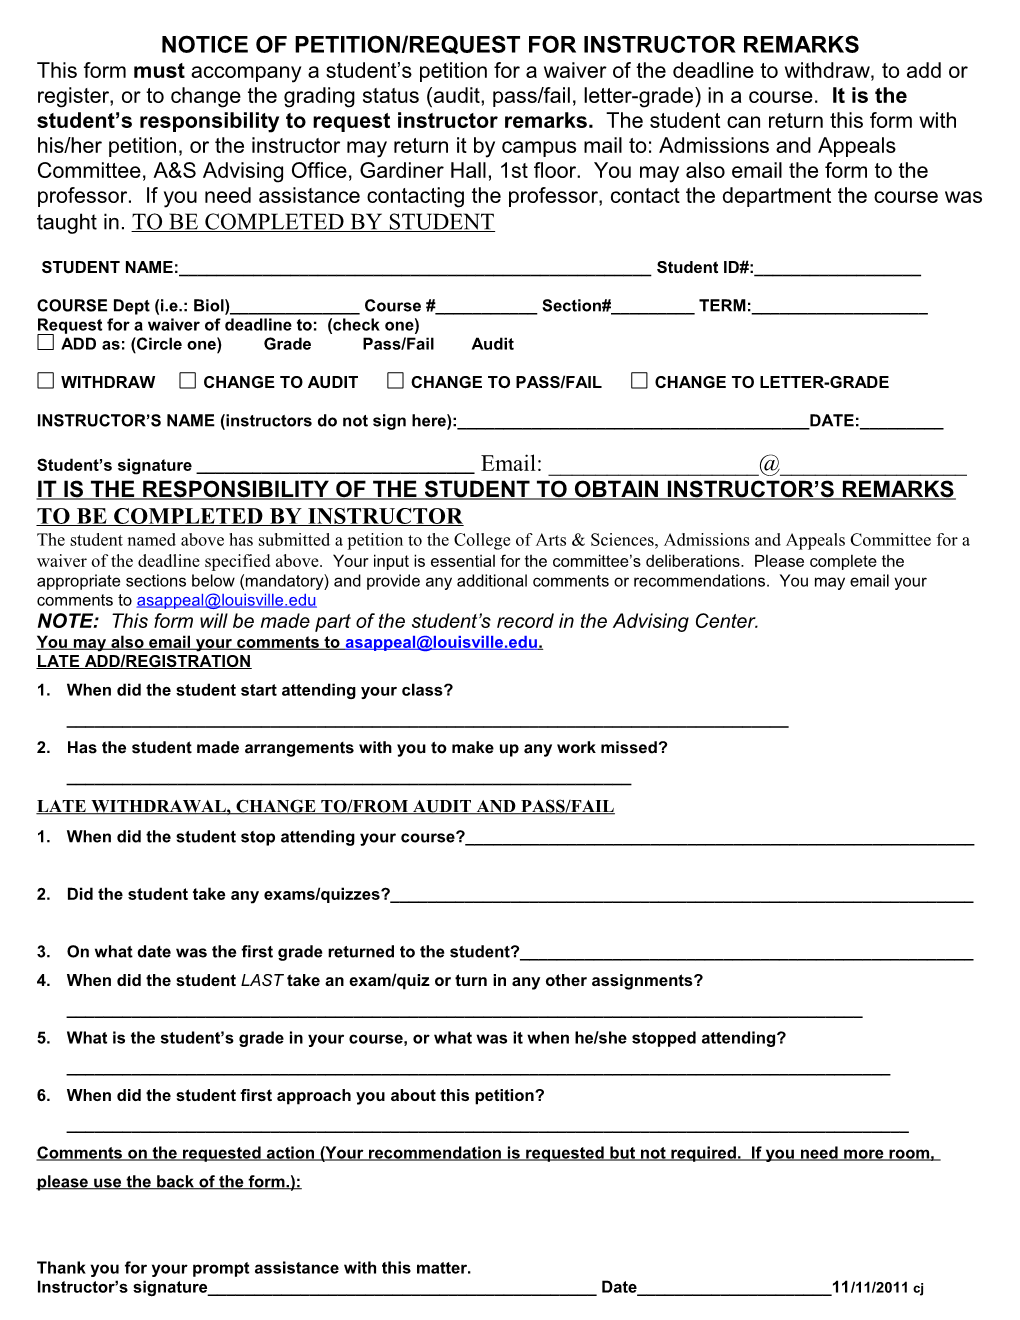 Notice of Petition/Request for Instructor Remarks